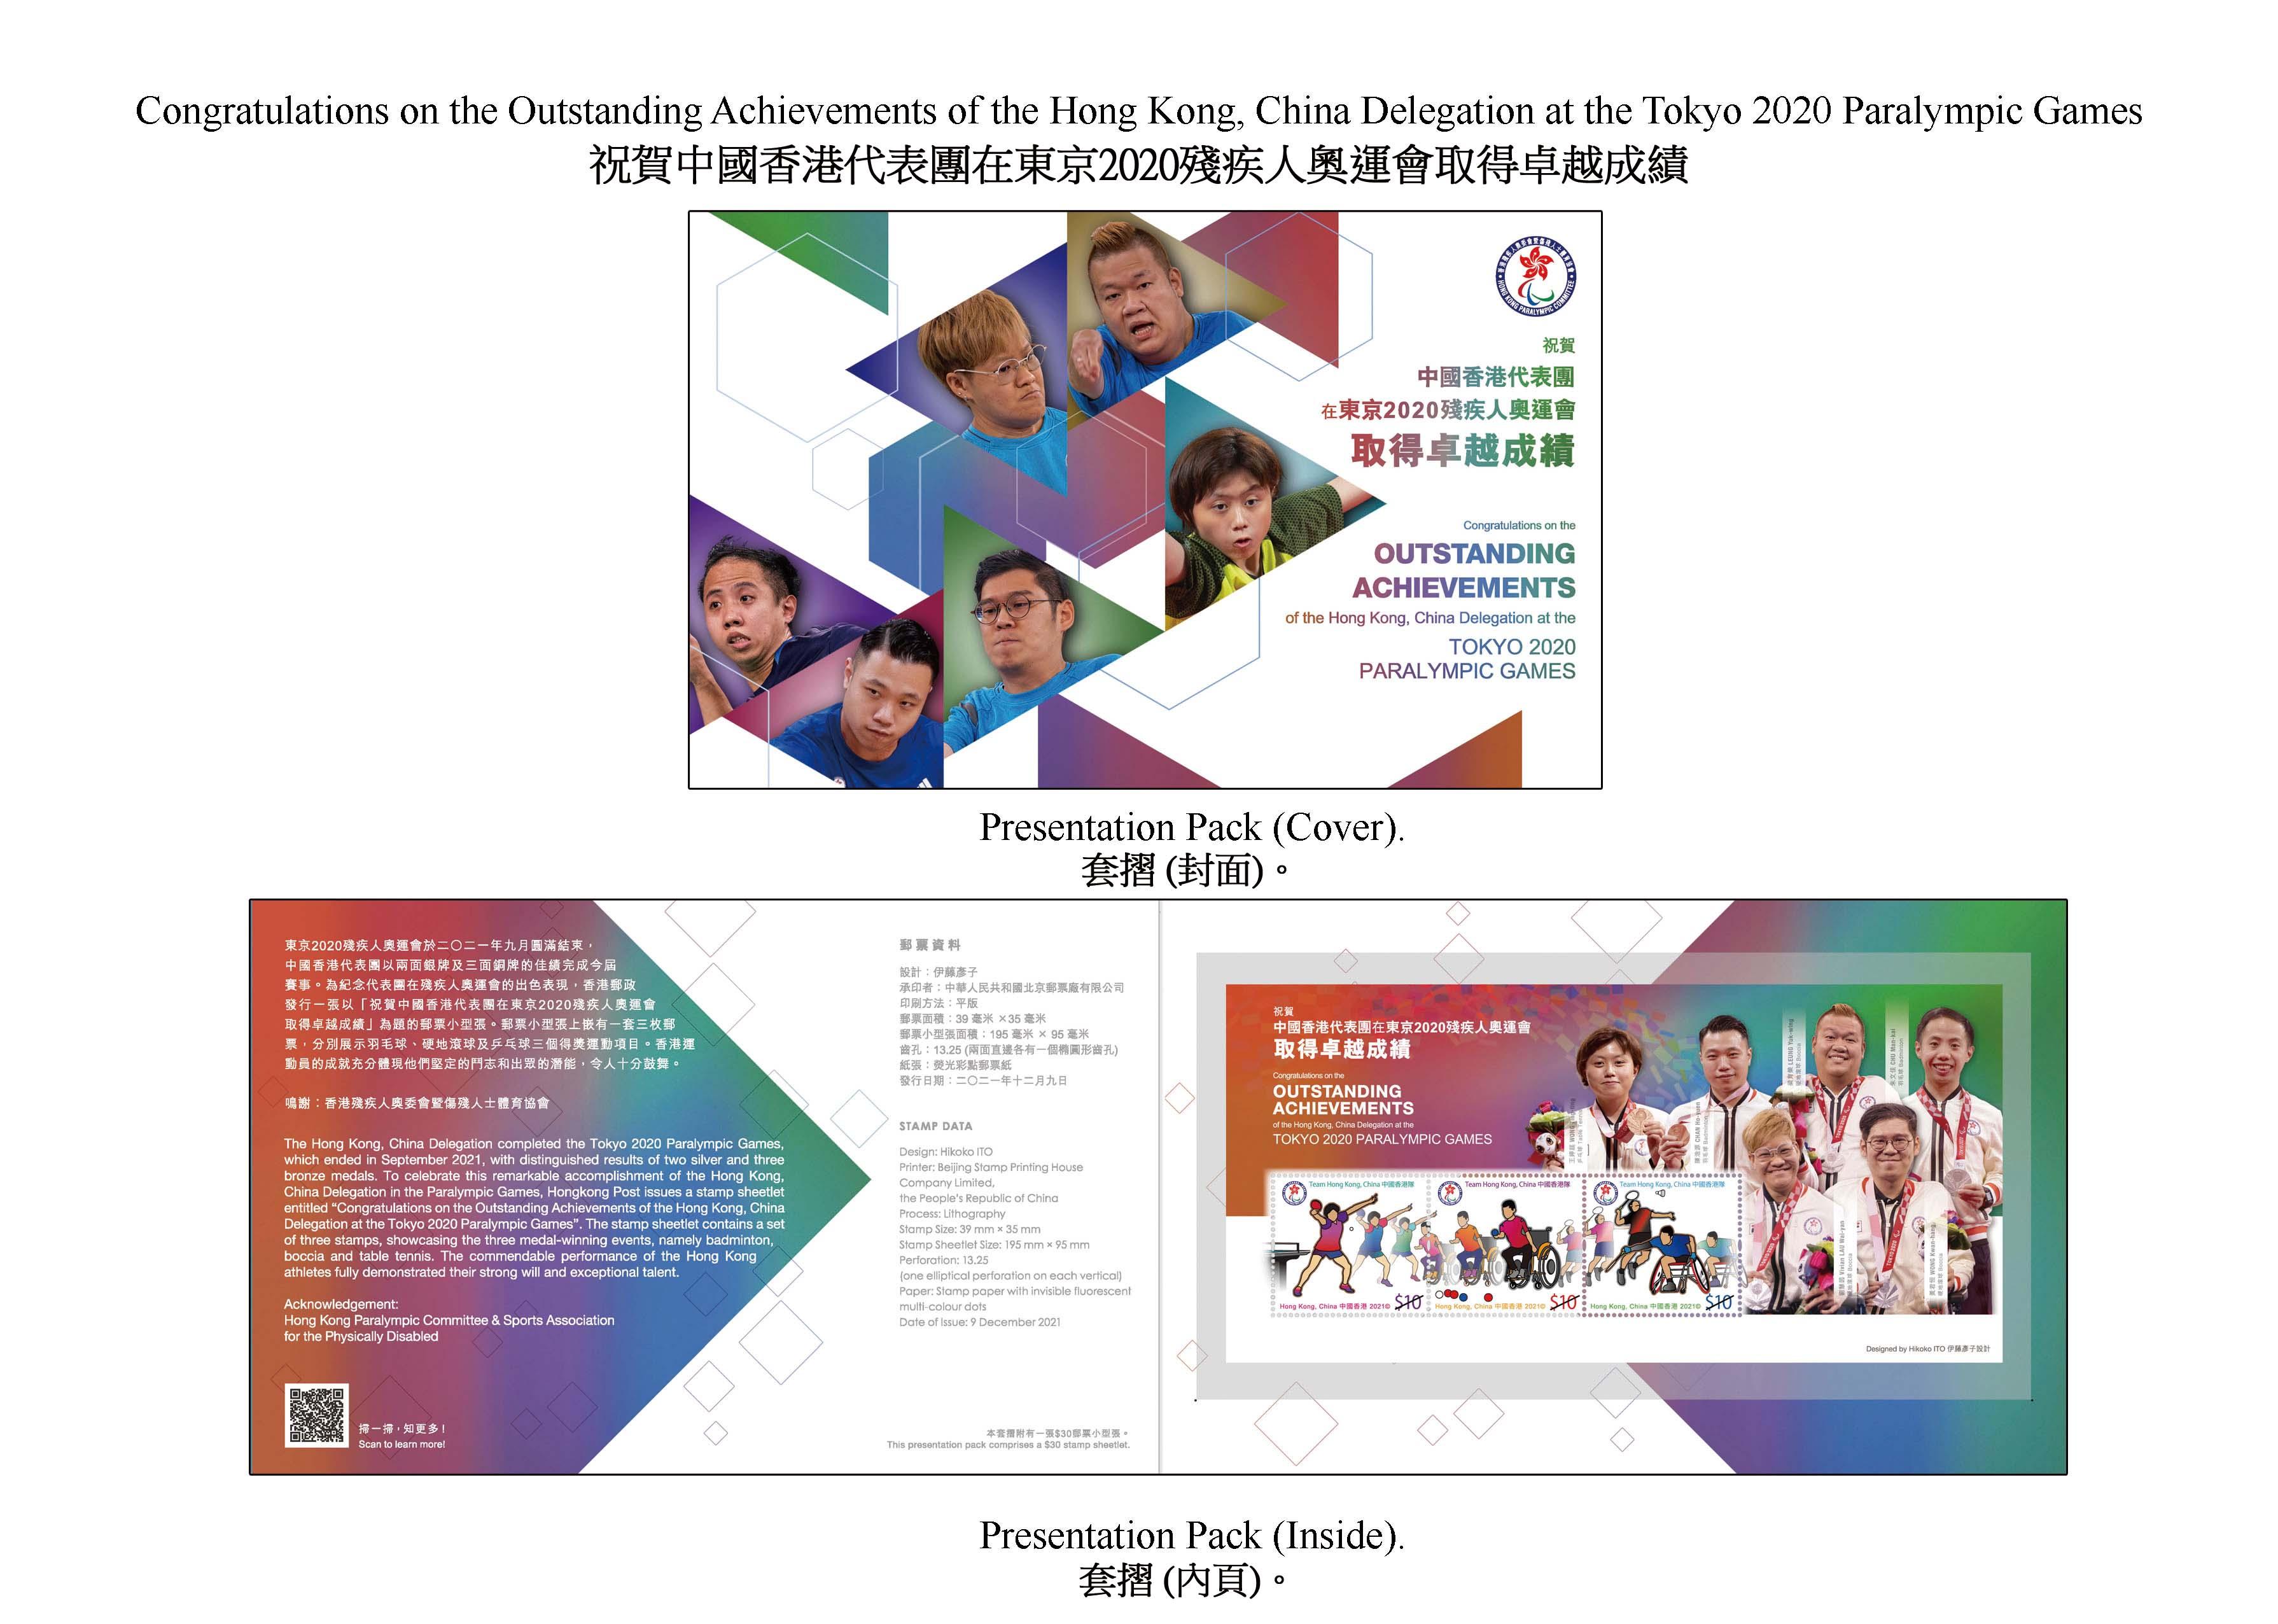 Hongkong Post will launch a special stamps issue and associated philatelic products with the theme "Congratulations on the Outstanding Achievements of the Hong Kong, China Delegation at the Tokyo 2020 Paralympic Games" on December 9 (Thursday). Photo shows the presentation pack.
